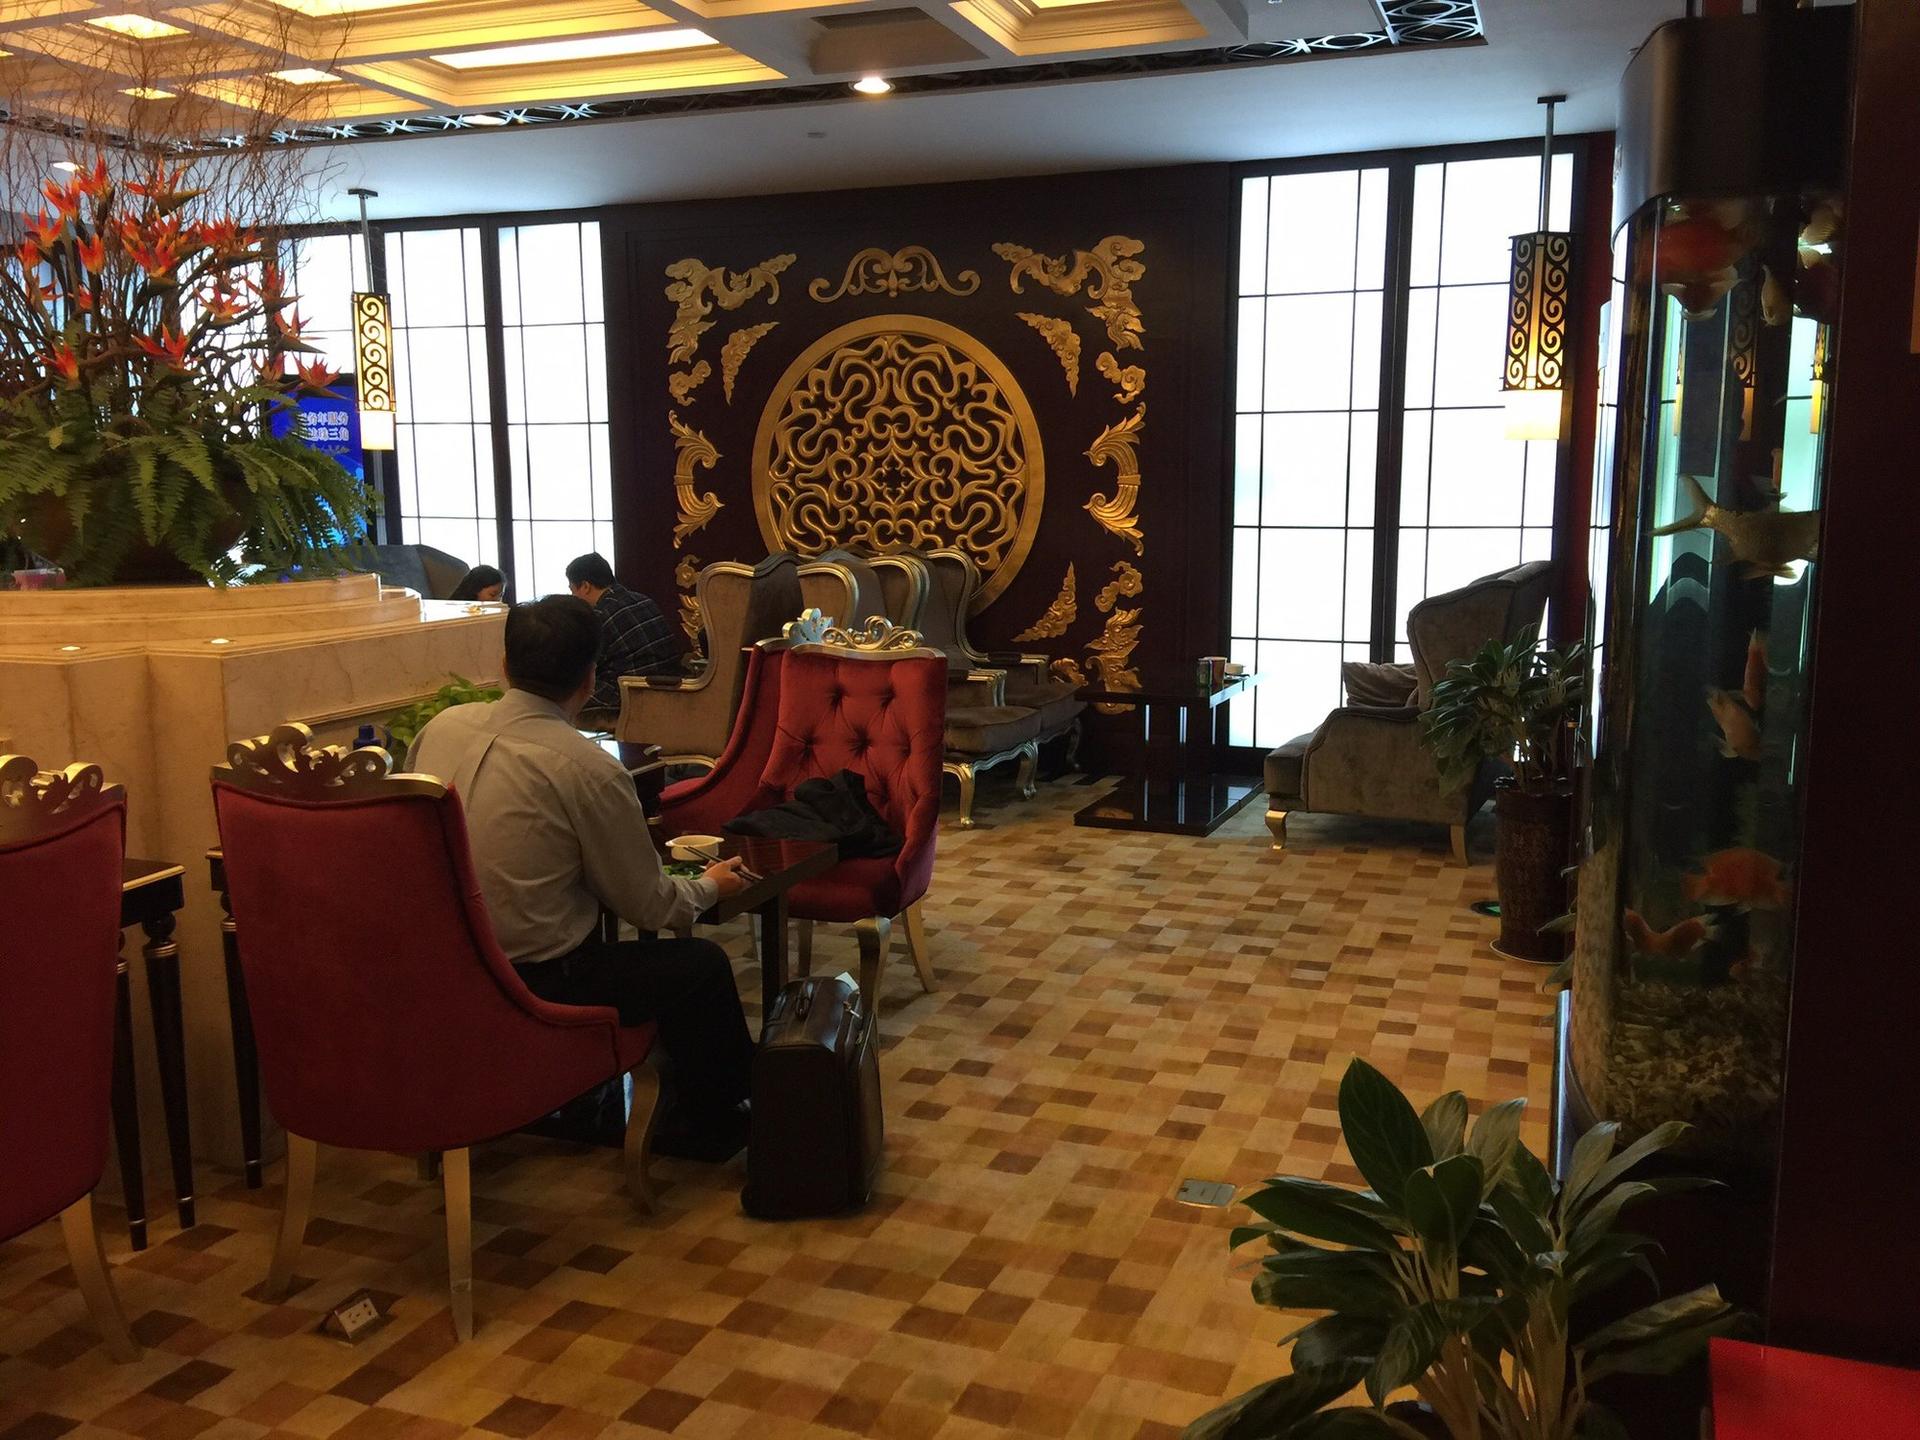 China Eastern First Class Lounge image 1 of 10